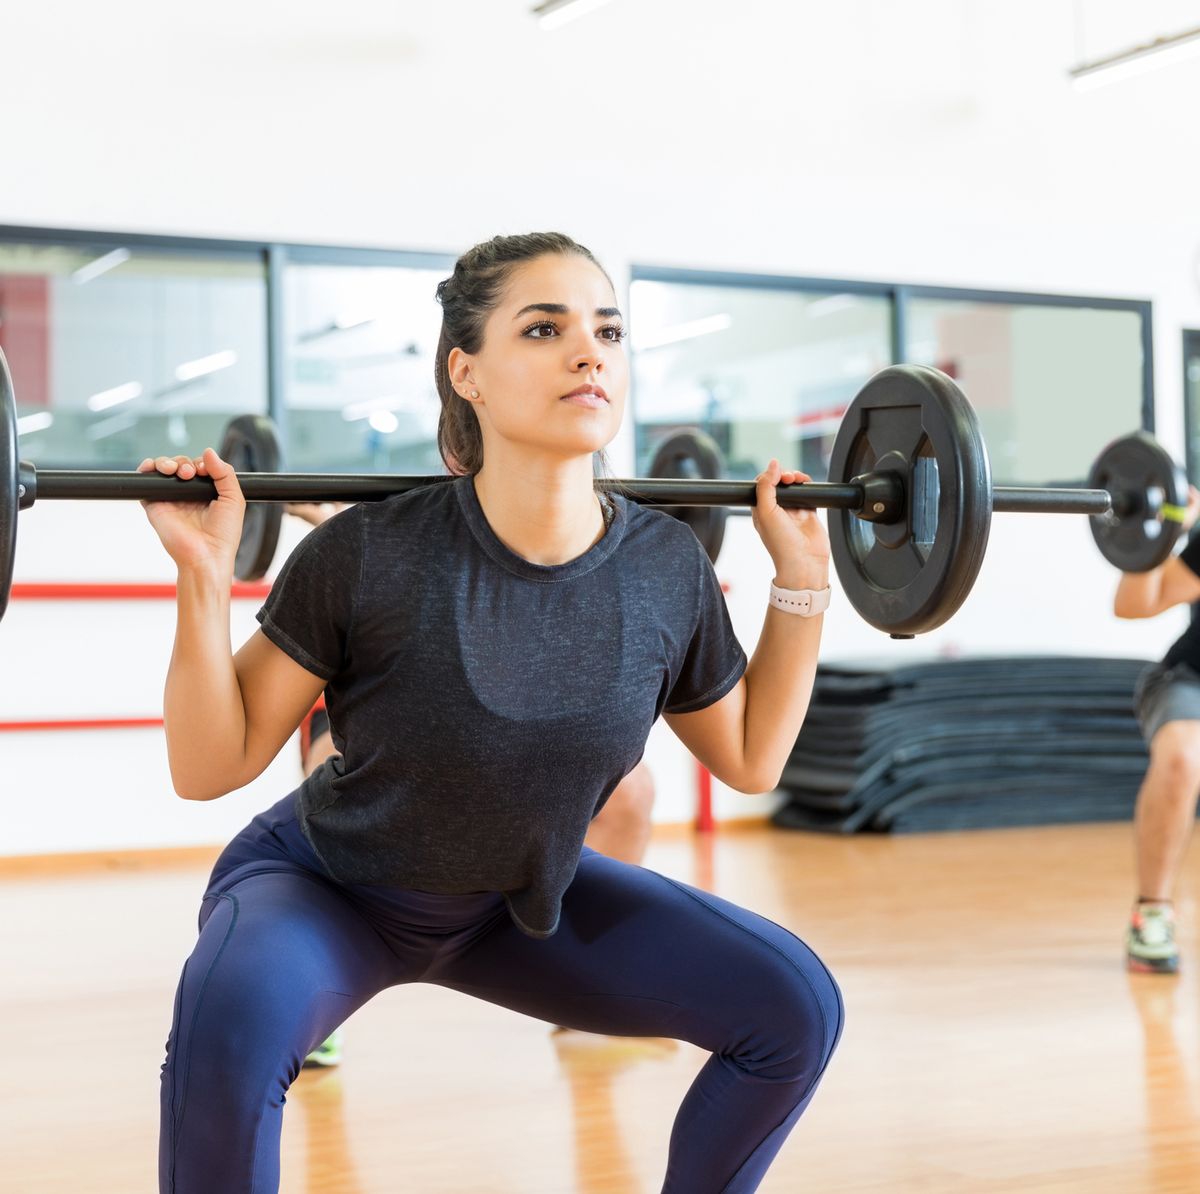 Strength training guide: Benefits, workouts, lingo + tips